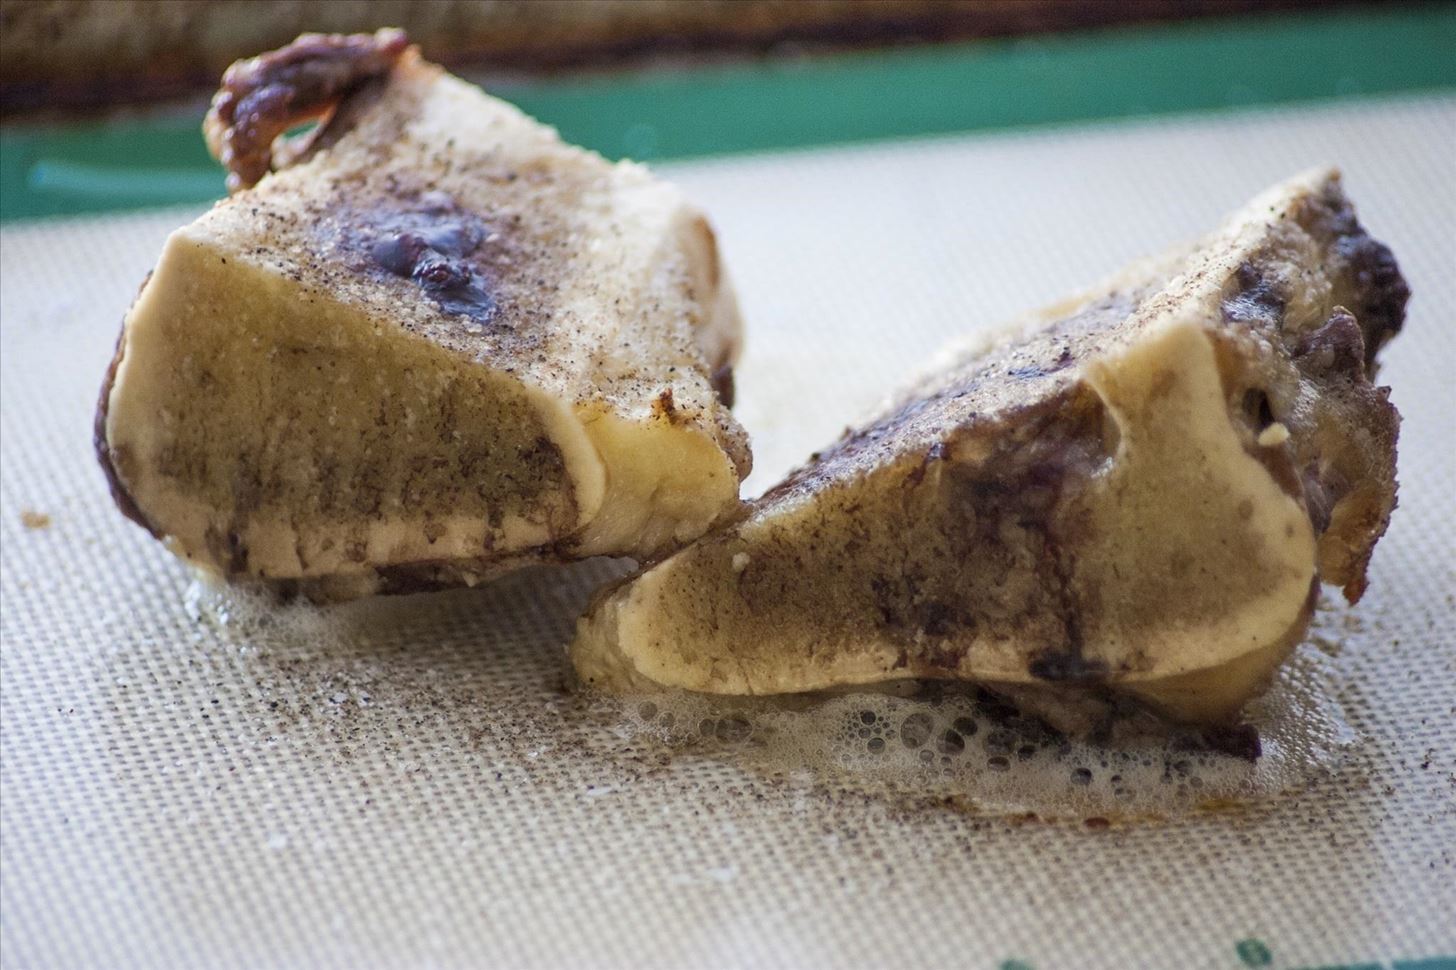 Weird Ingredient Wednesday: Bone Marrow, the Food That Tastes a Lot Better Than It Sounds